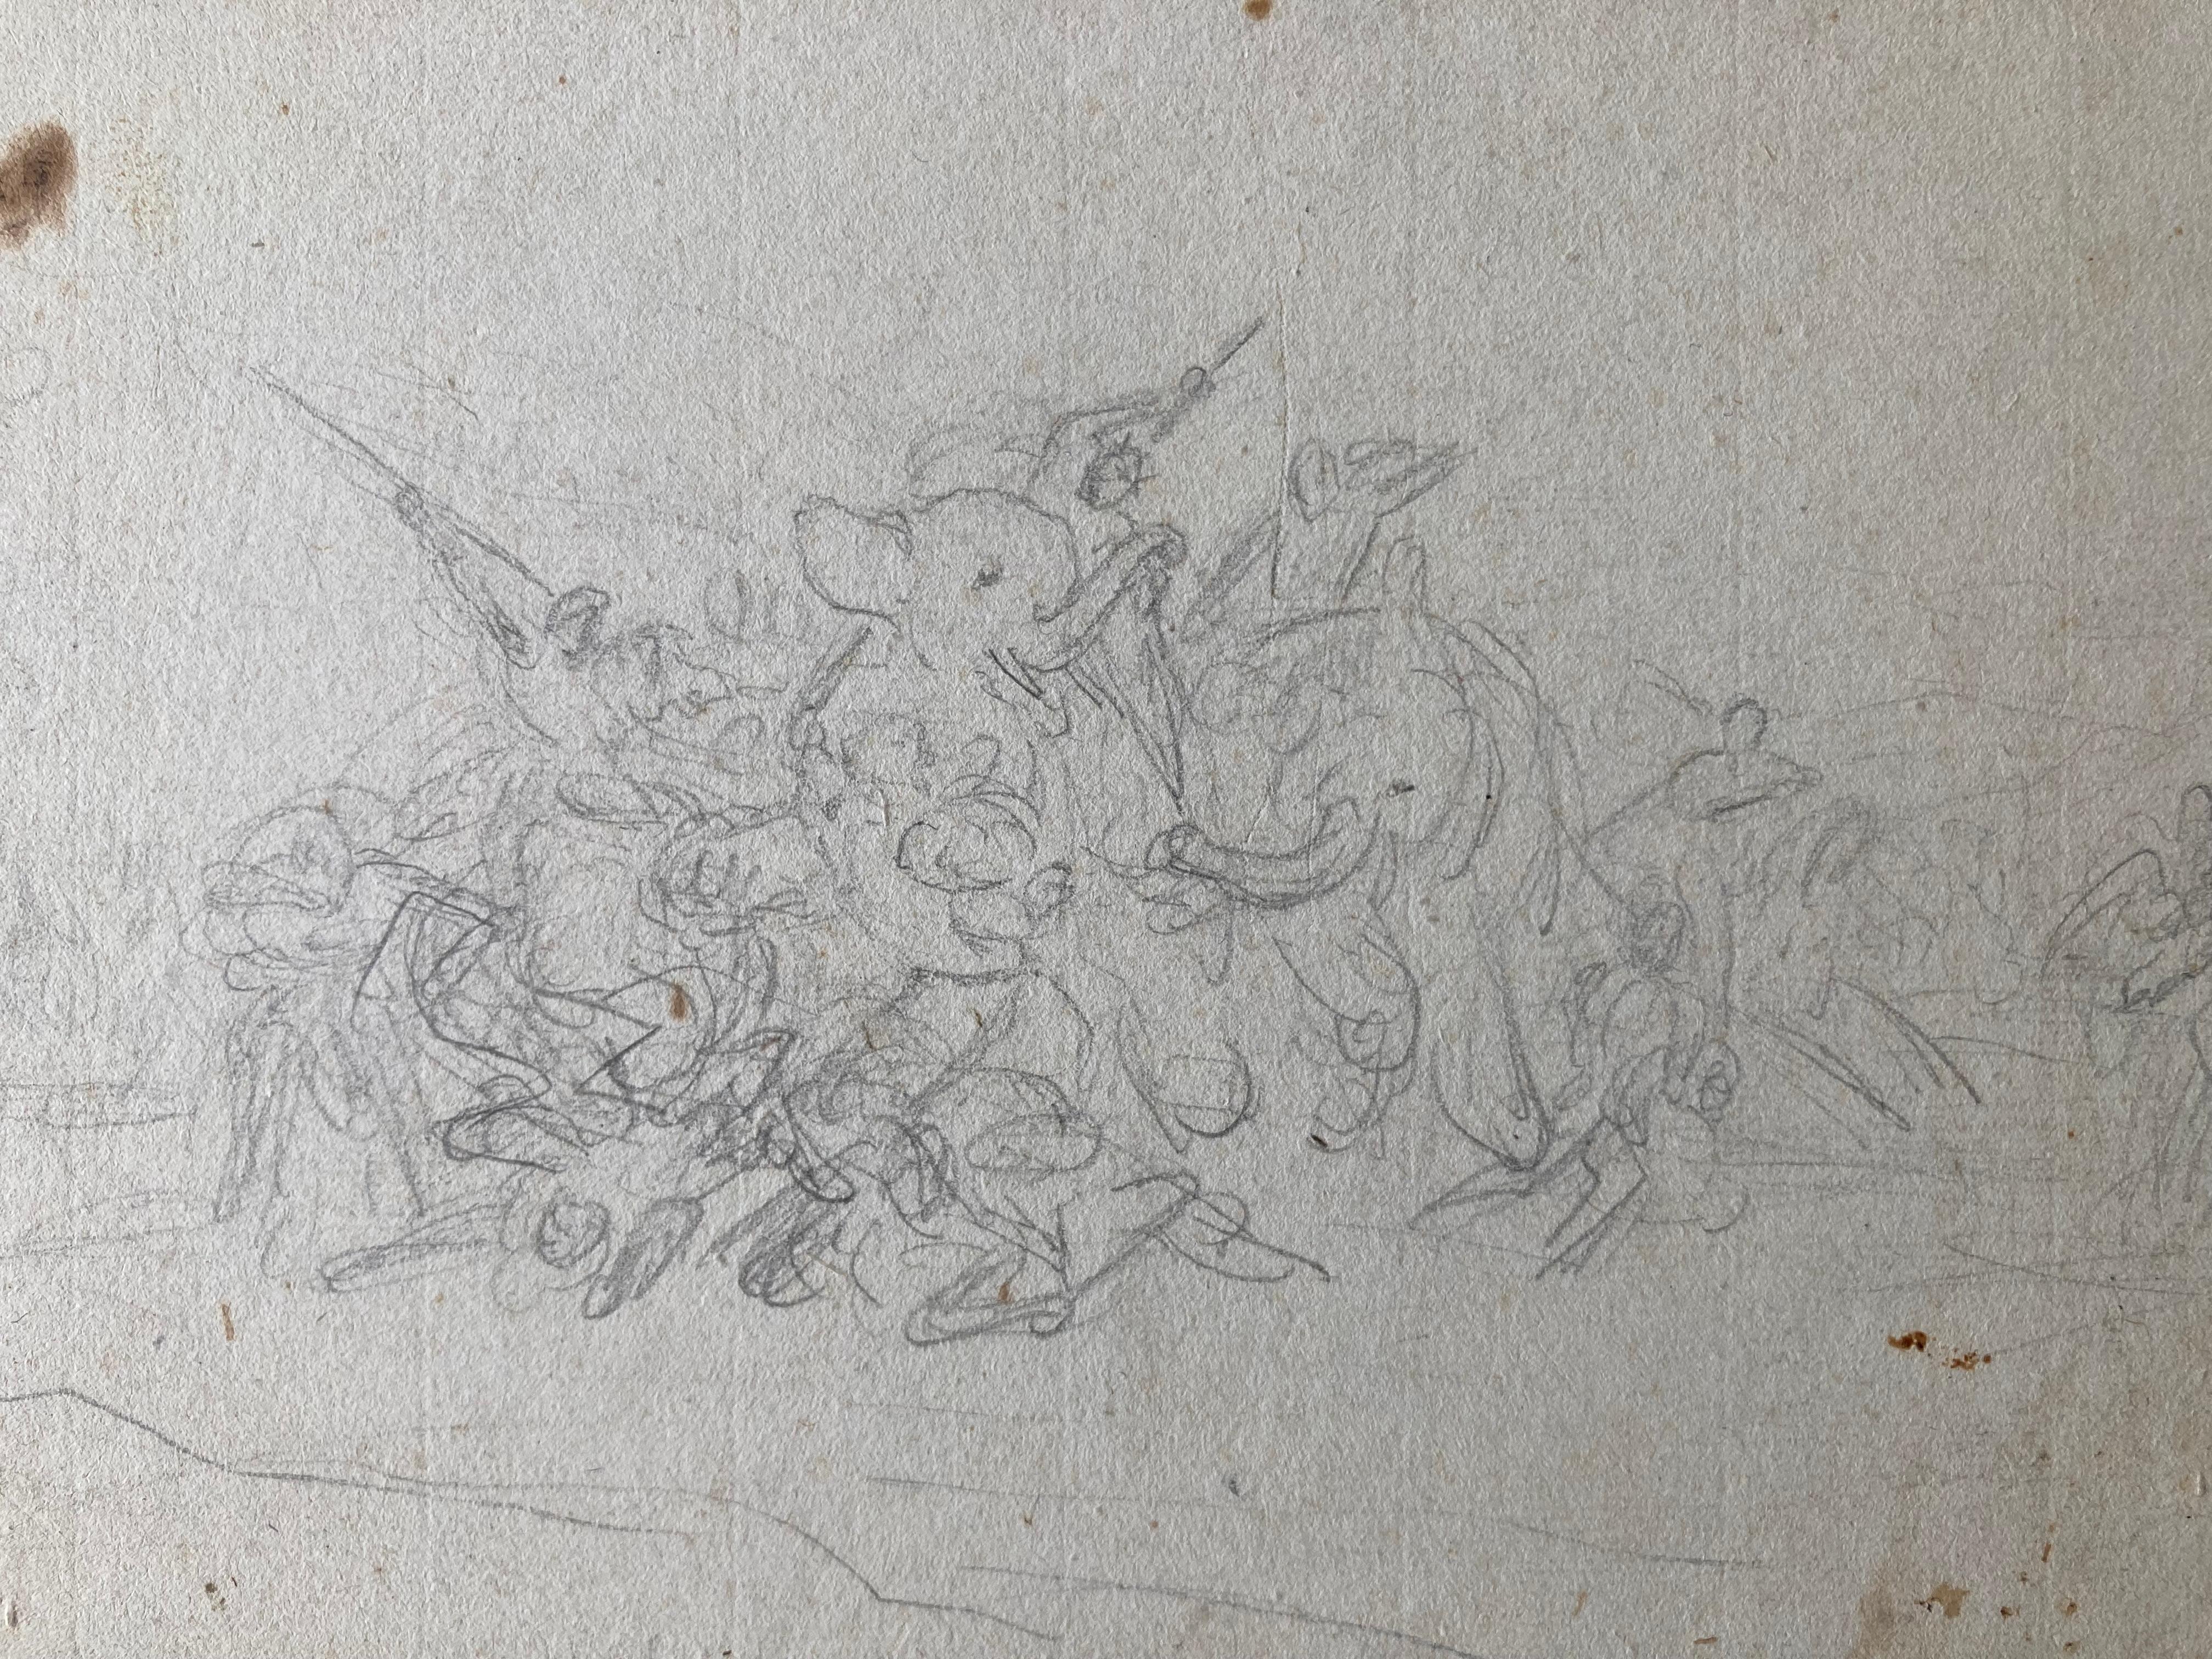 French Orientalist Art, Old Master Drawing Elephants, Hunt and Soldiers, Nature For Sale 3